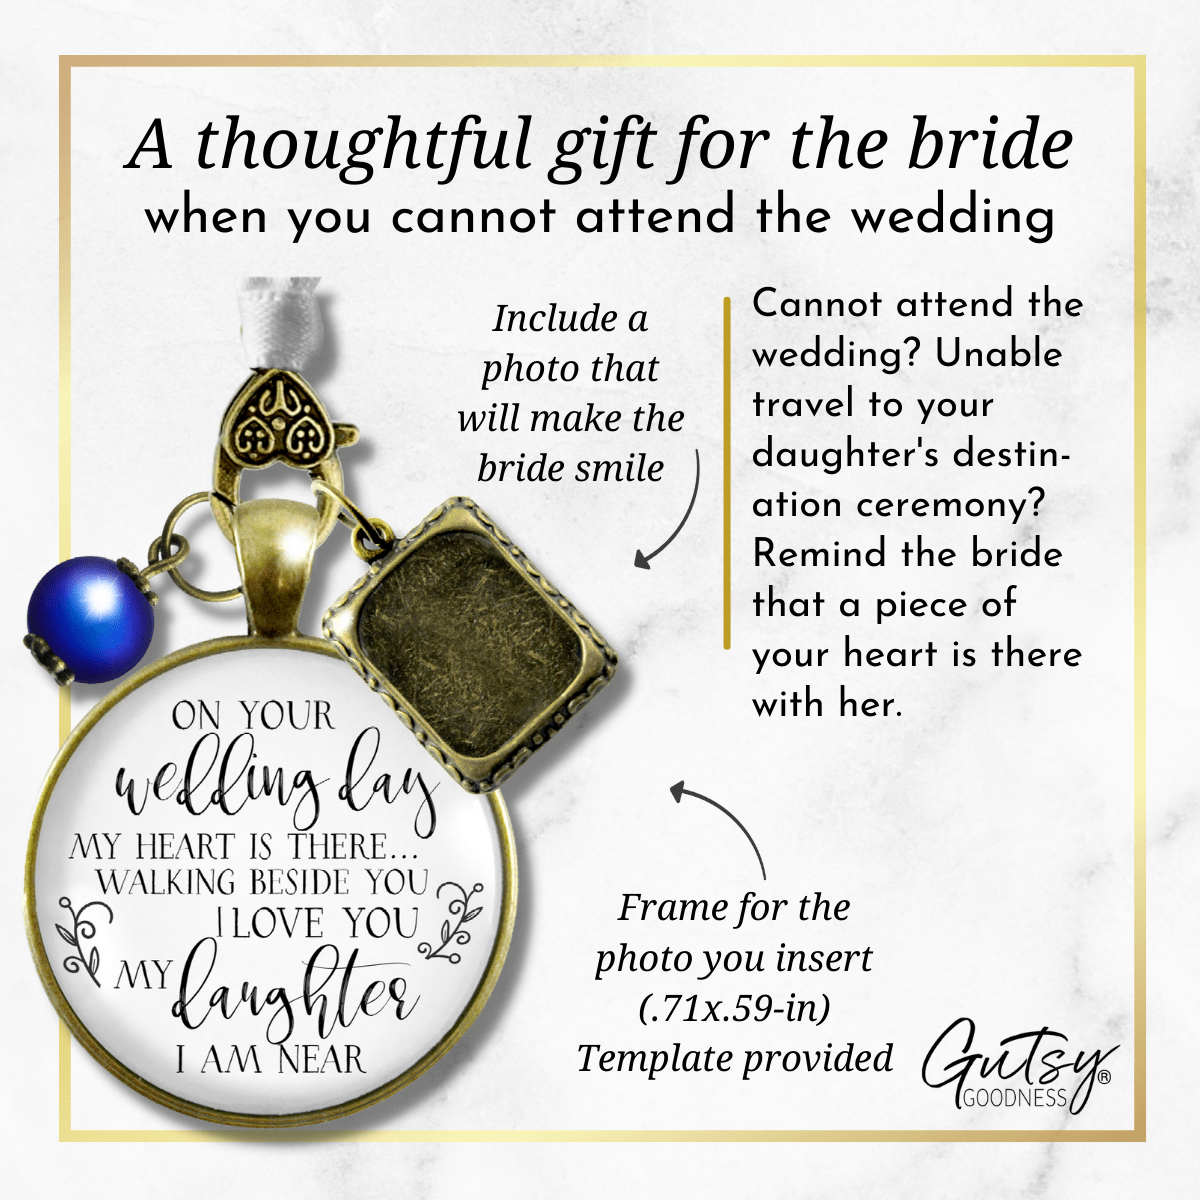 On Your Wedding Day MY Heart Is There Walking Beside You DAUGHTER - DESTINATION BRONZE - WHITE - BLUE BEAD